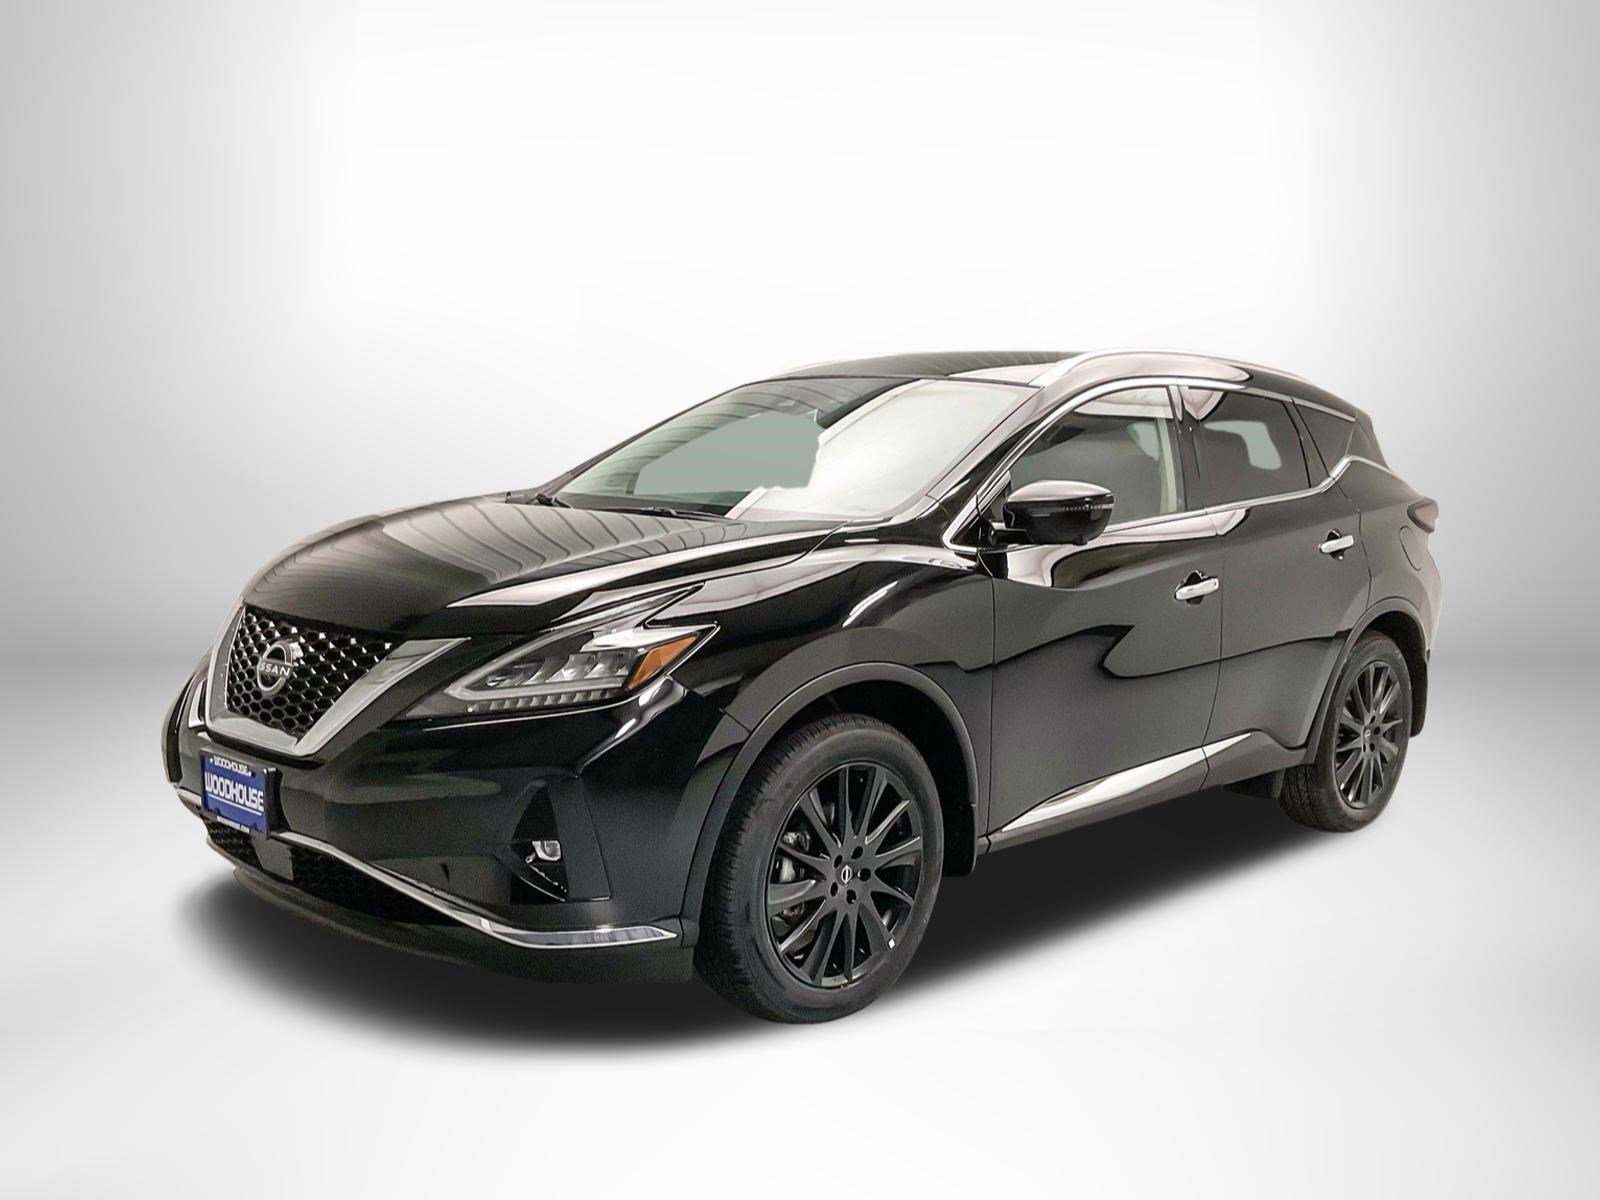 New 2023 Nissan Murano SL Crossover in Bellevue #N230044 | Woodhouse Nissan